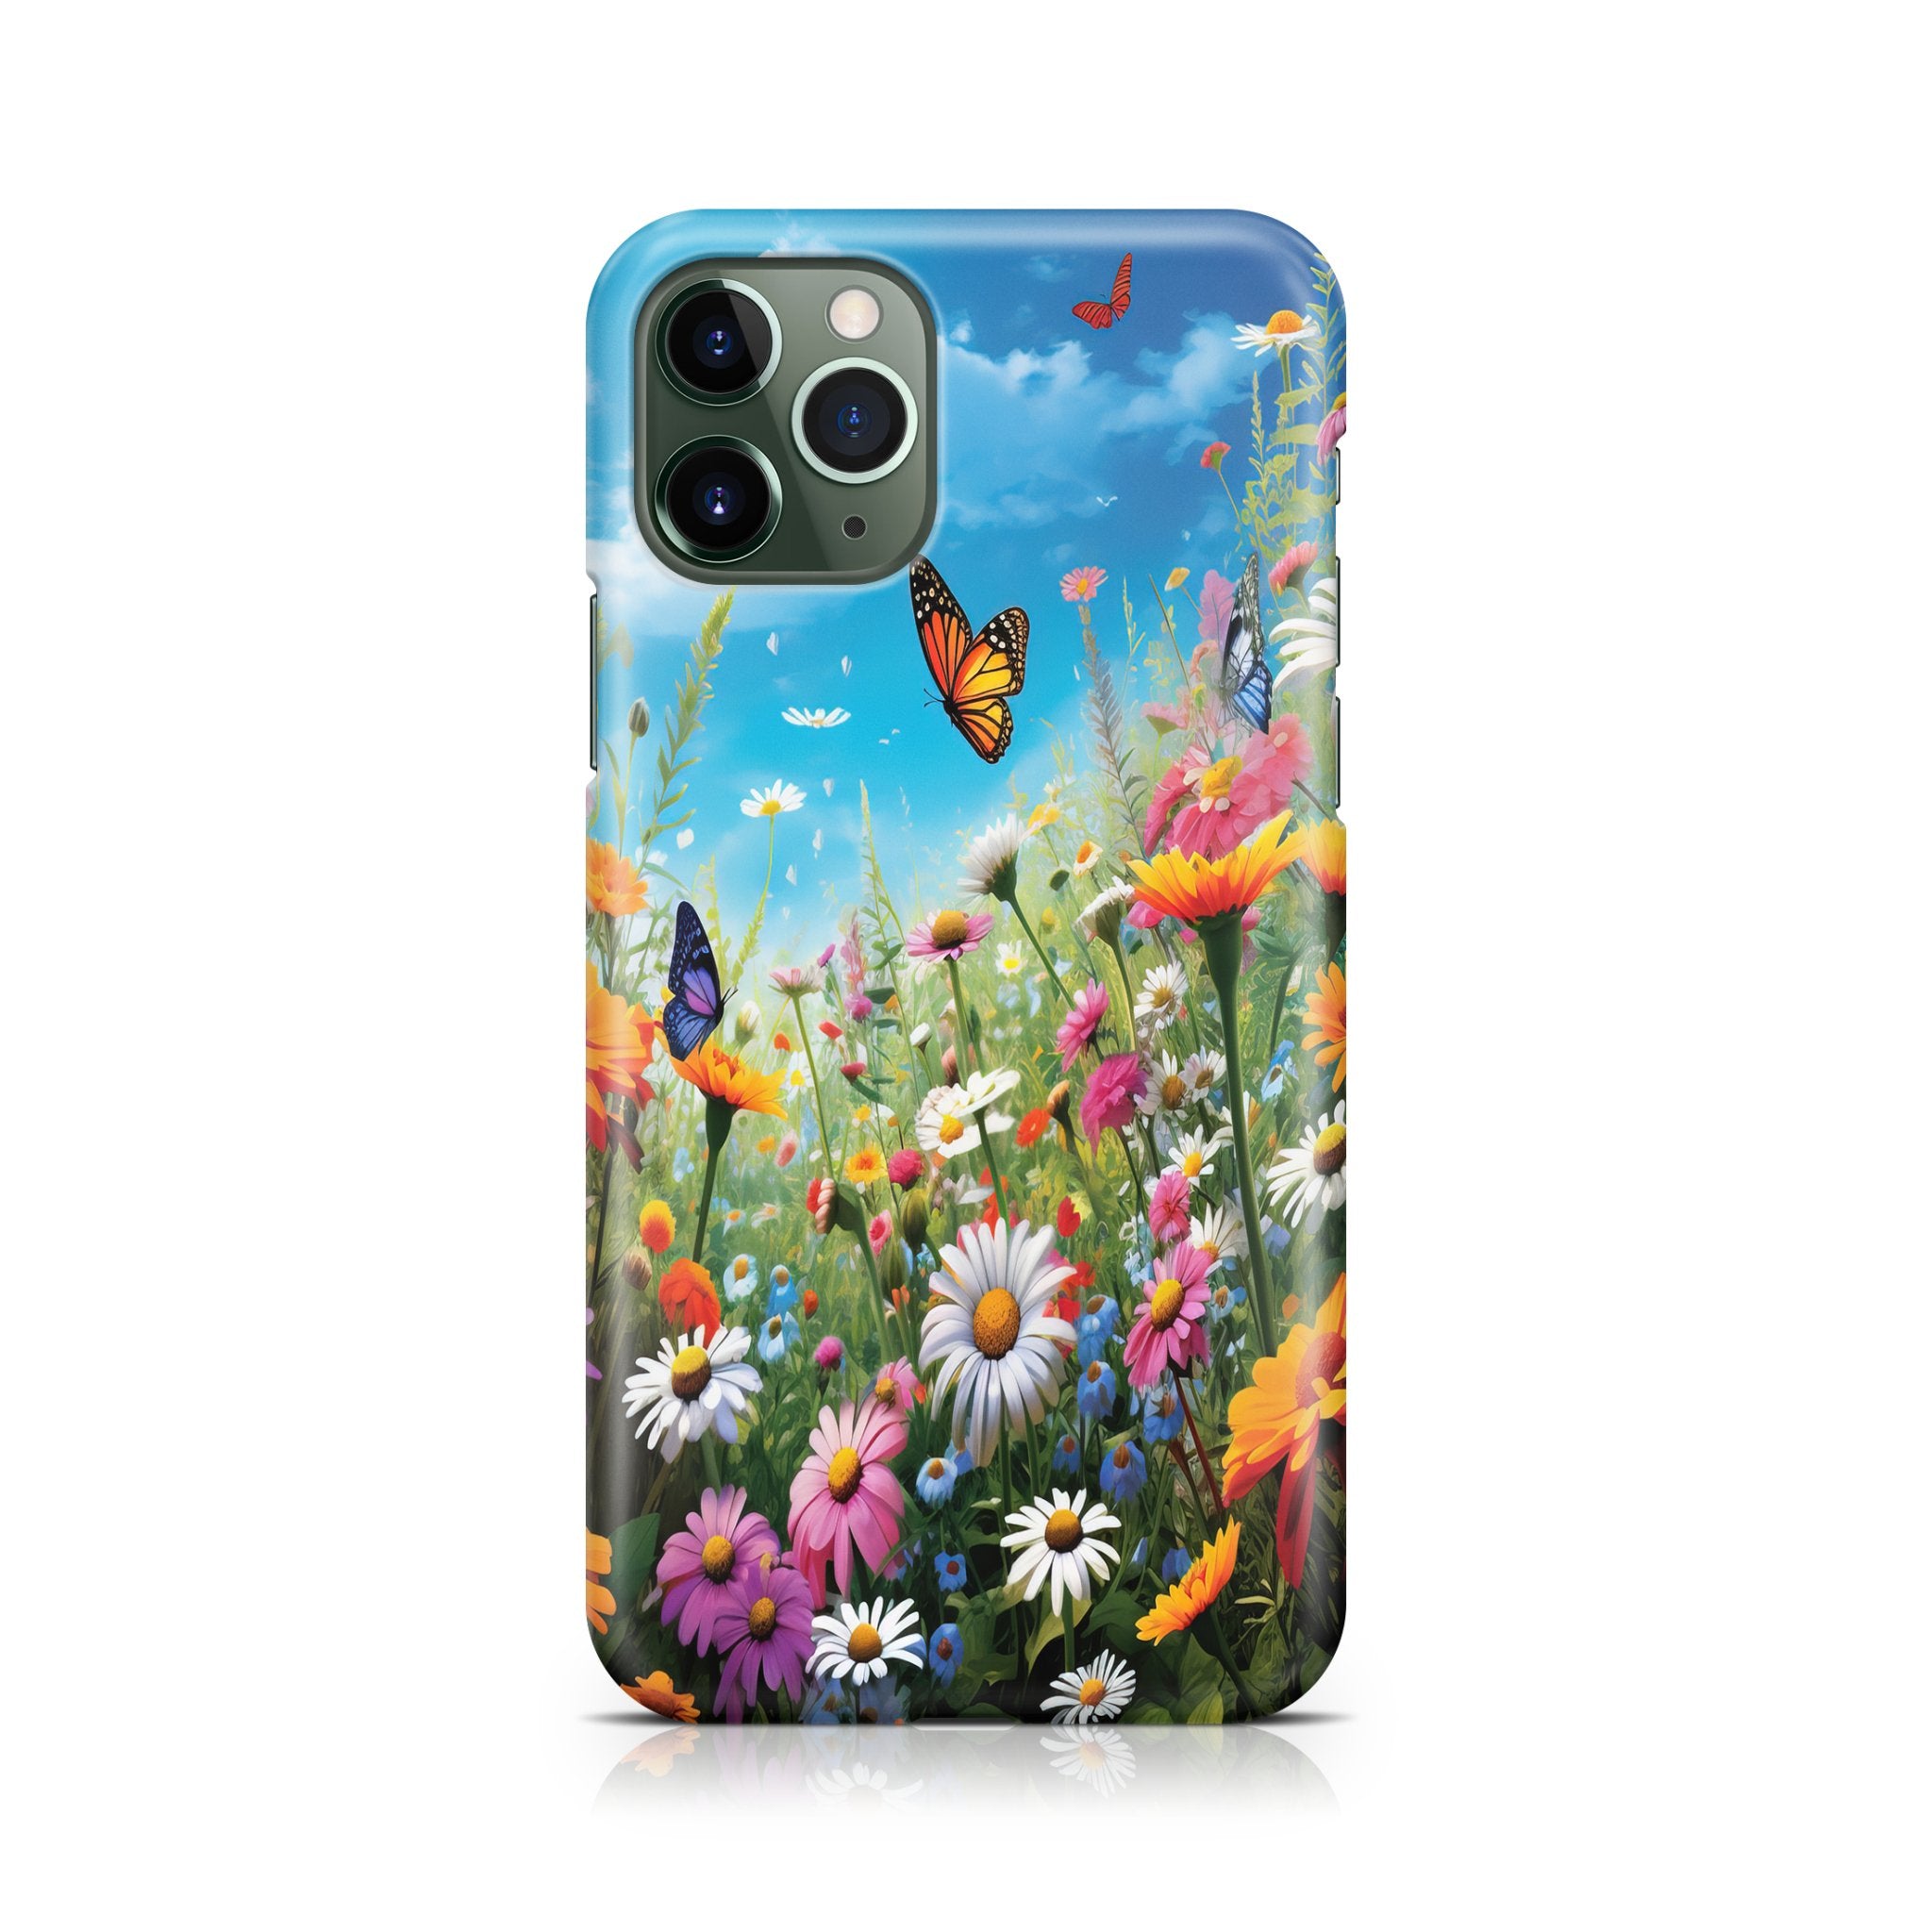 Beauty Embrace - iPhone phone case designs by CaseSwagger